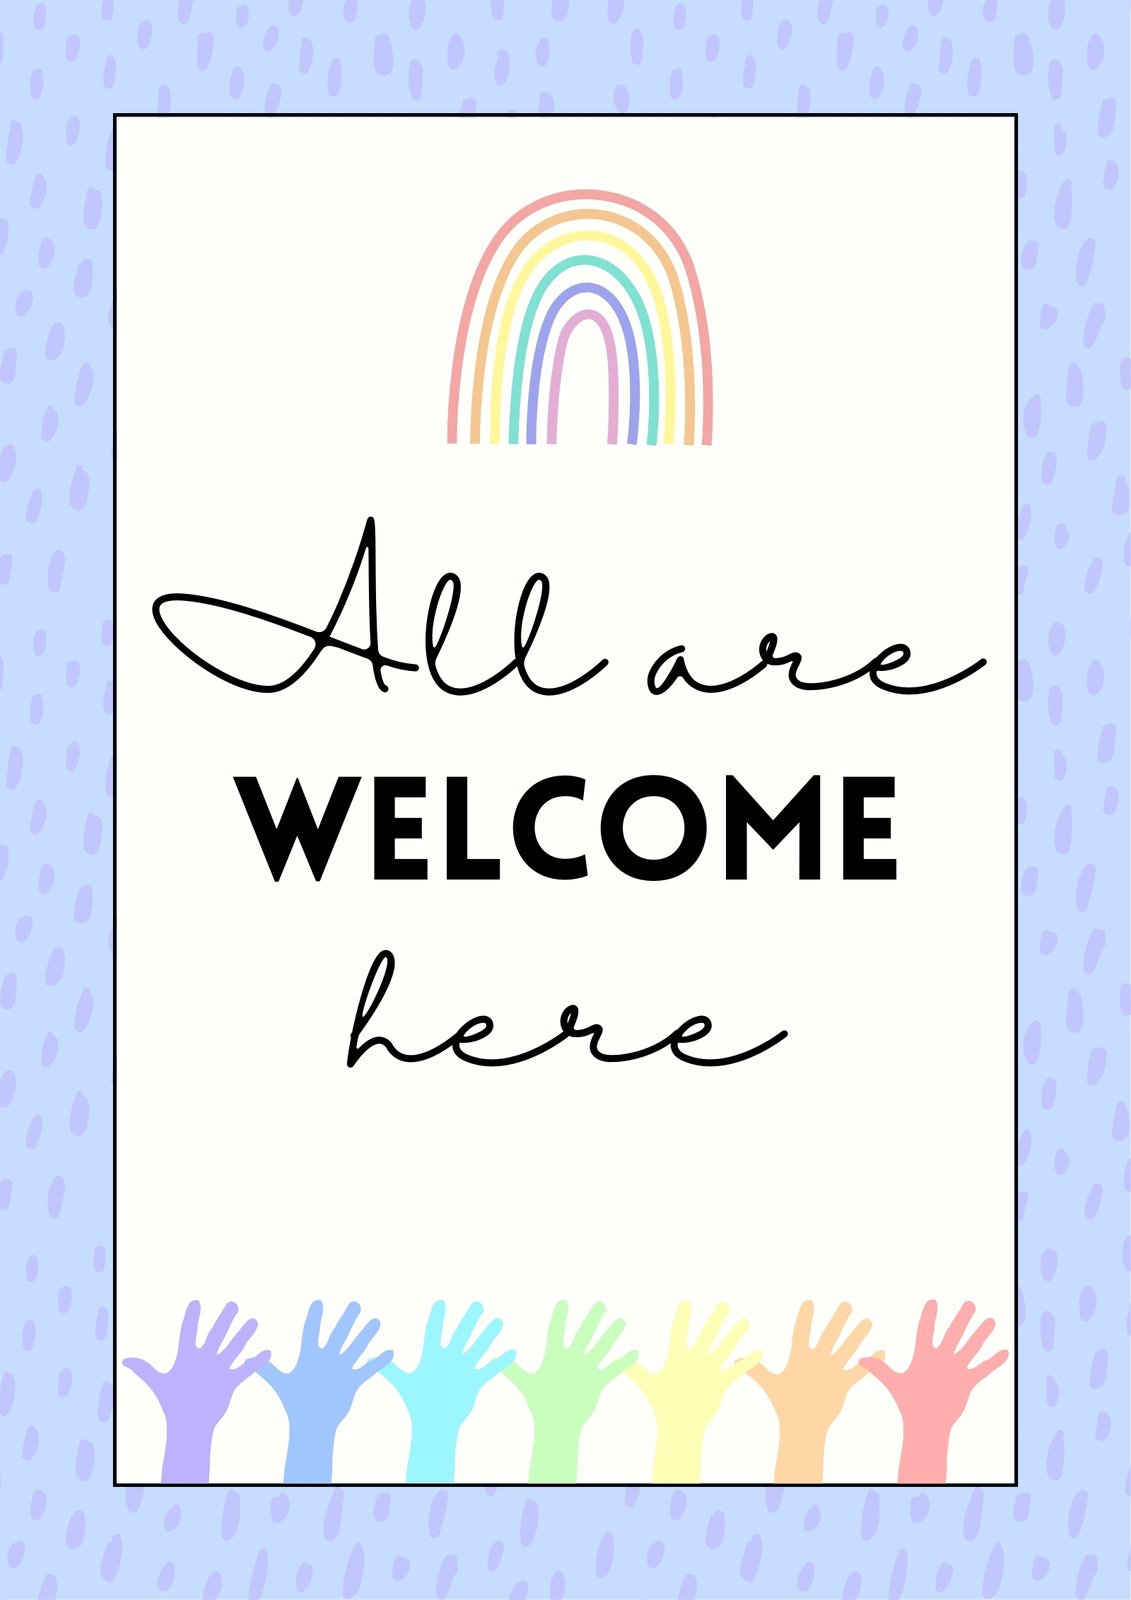 Free printable classroom welcome poster templates | Canva